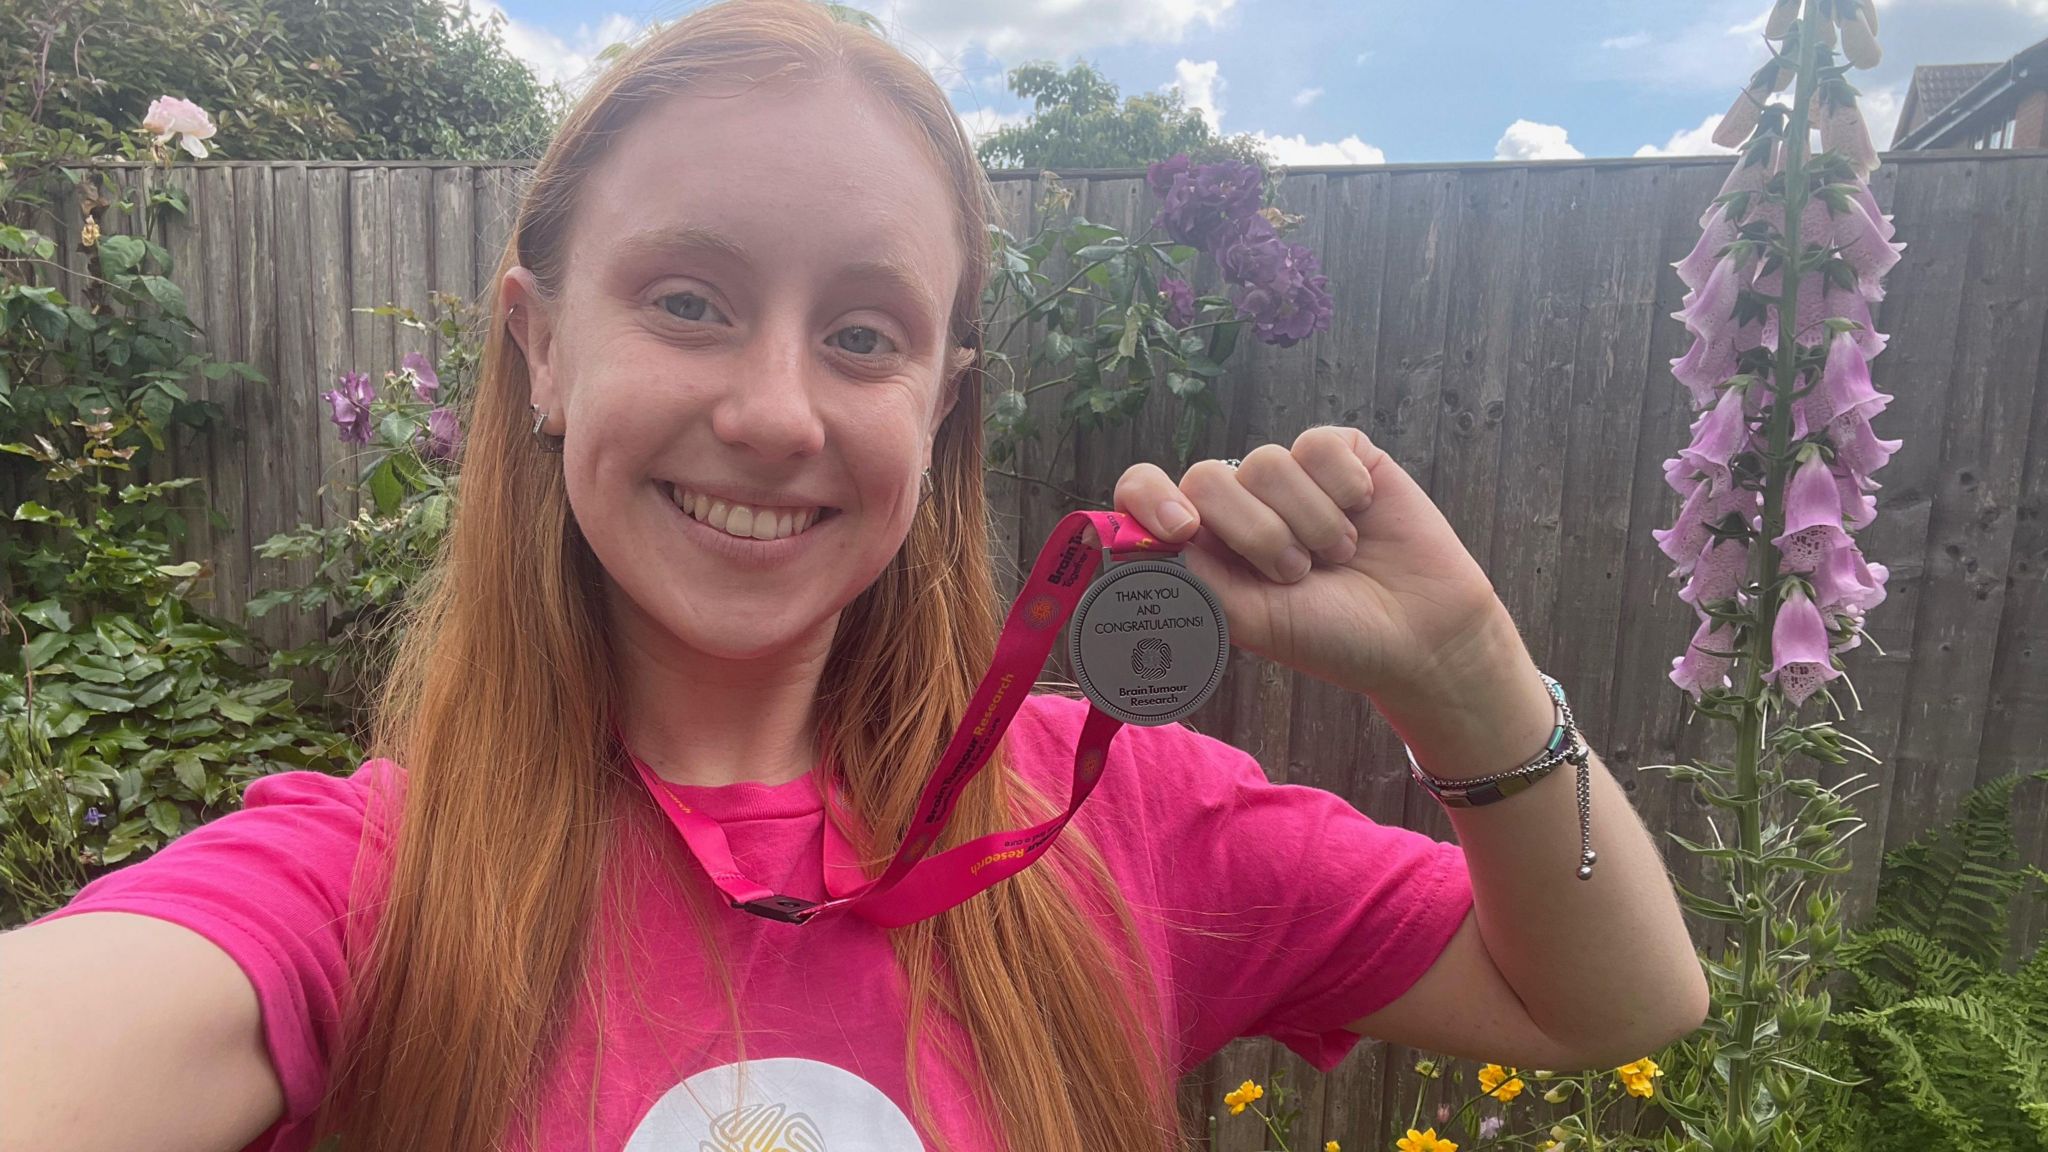 Charlotte Greatorex holding a medal